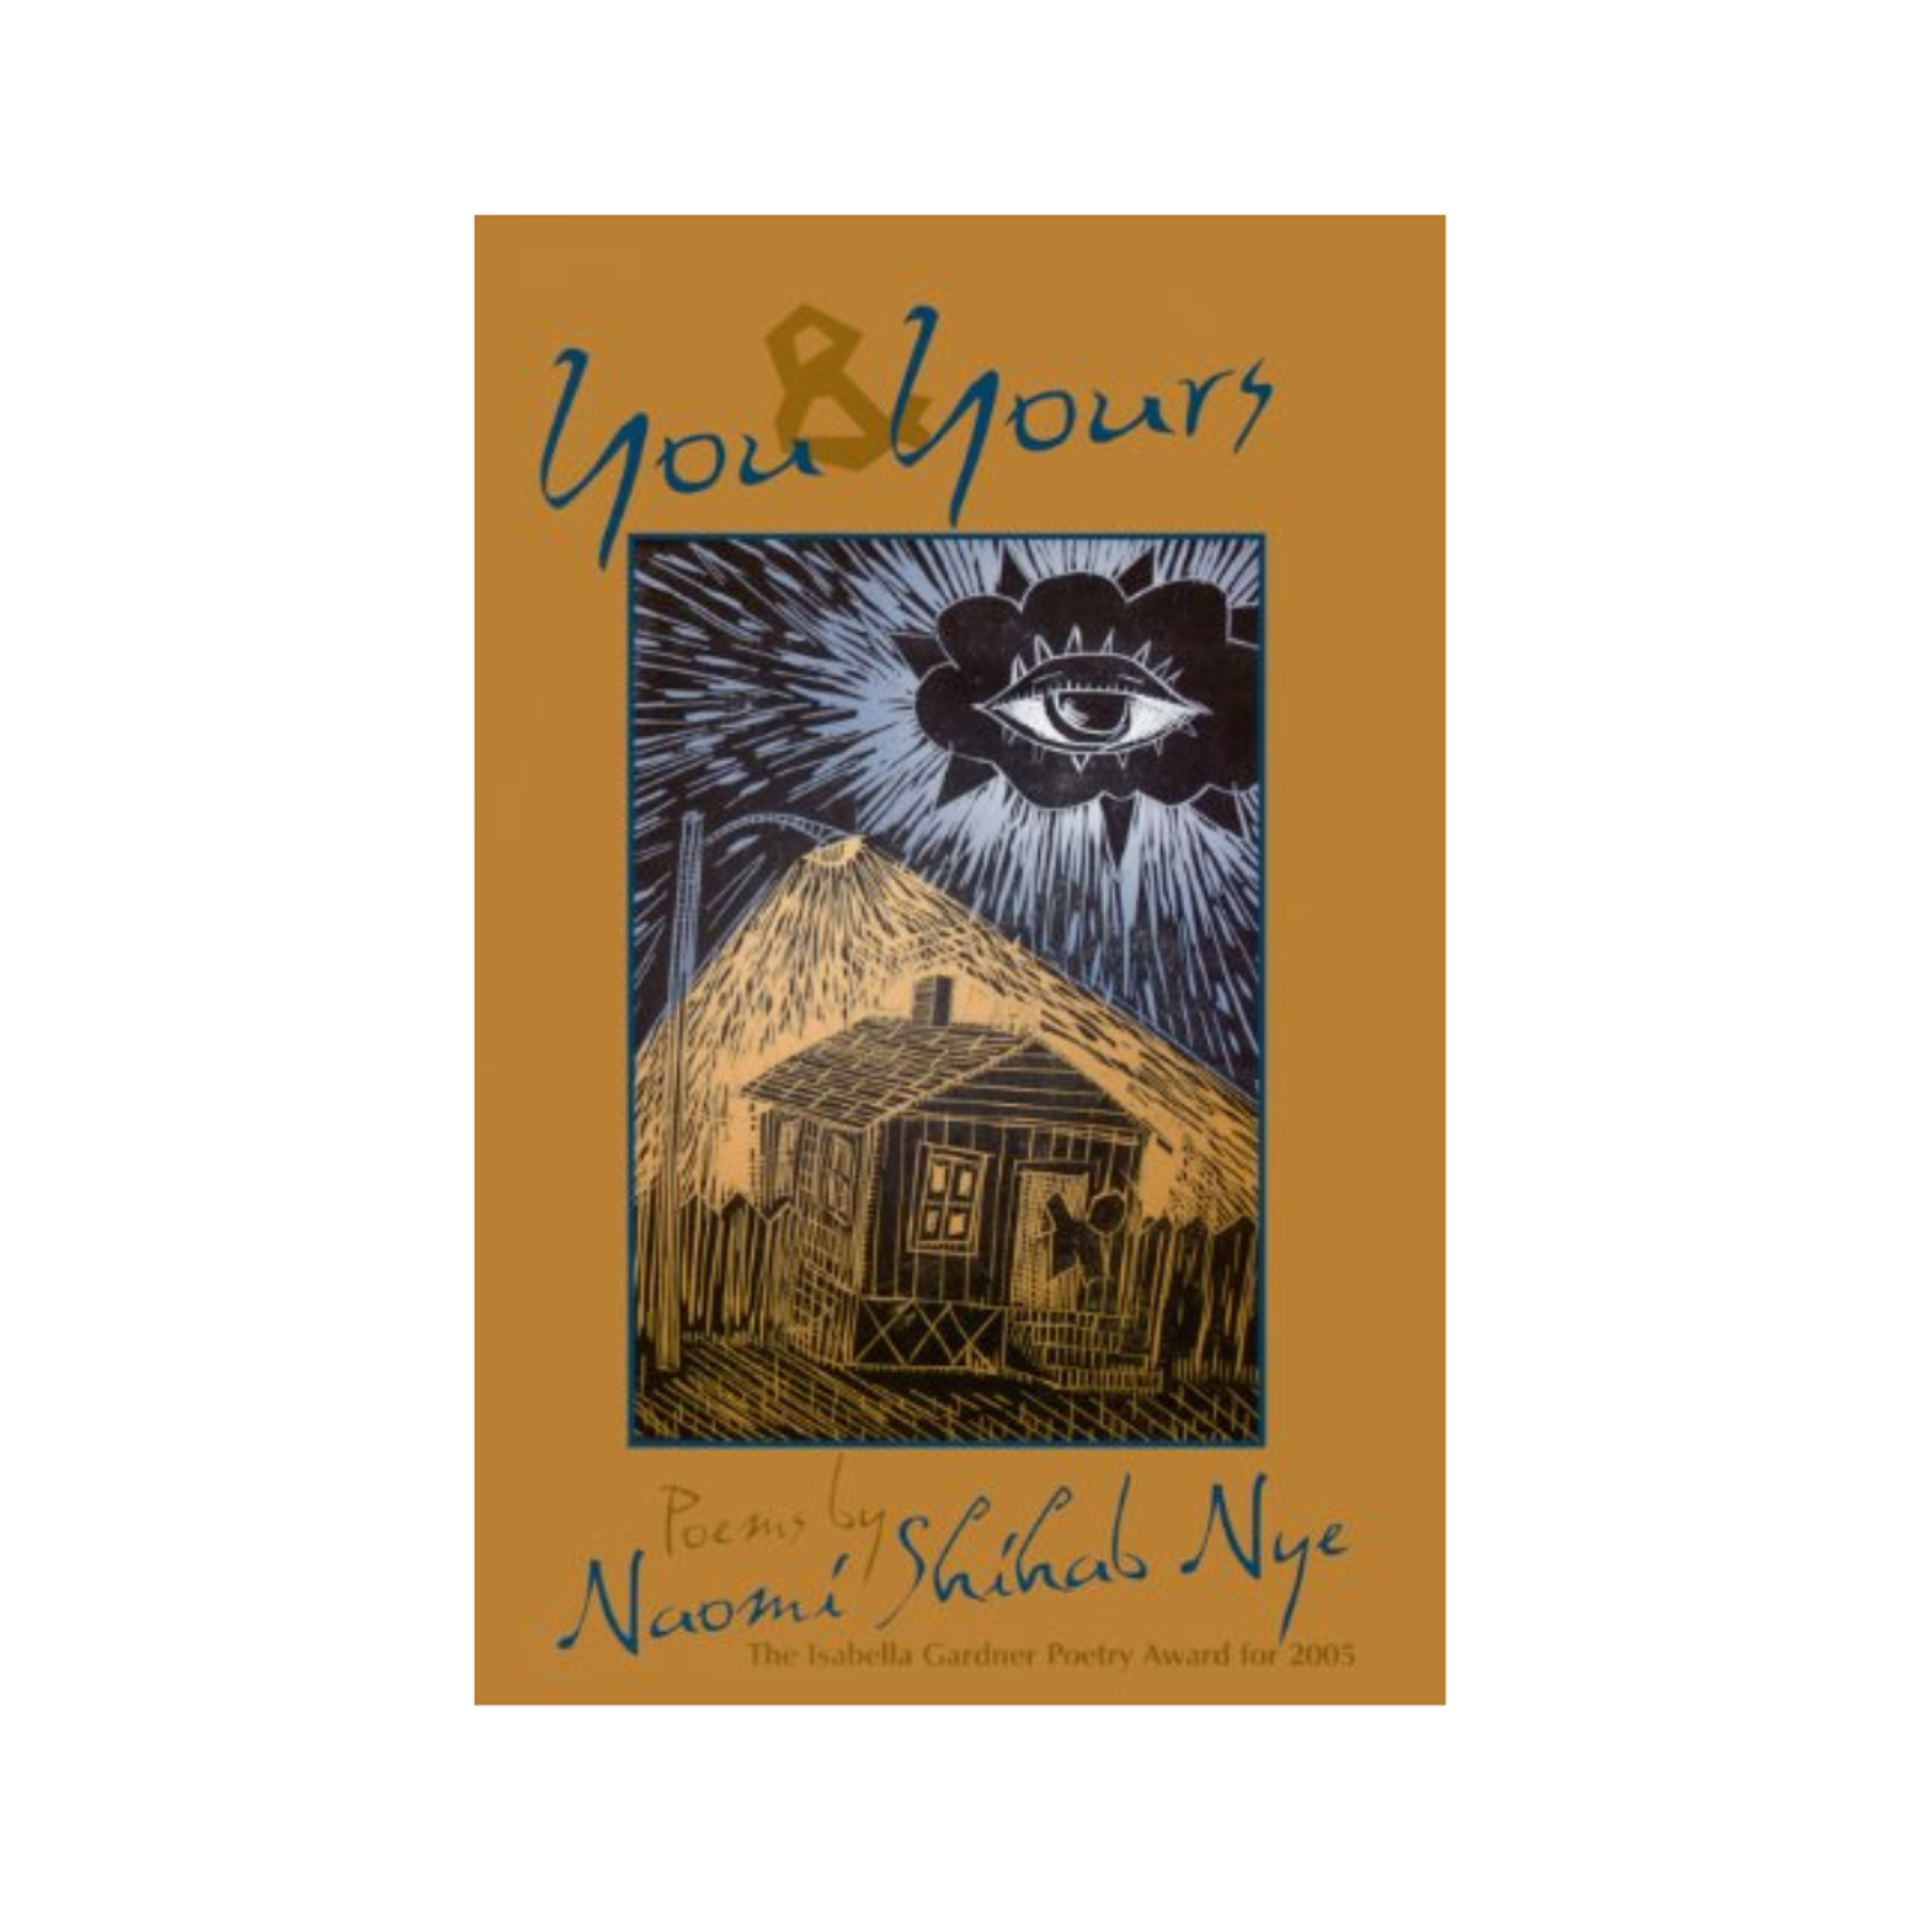 You and Yours by Naomi Shihab Nye